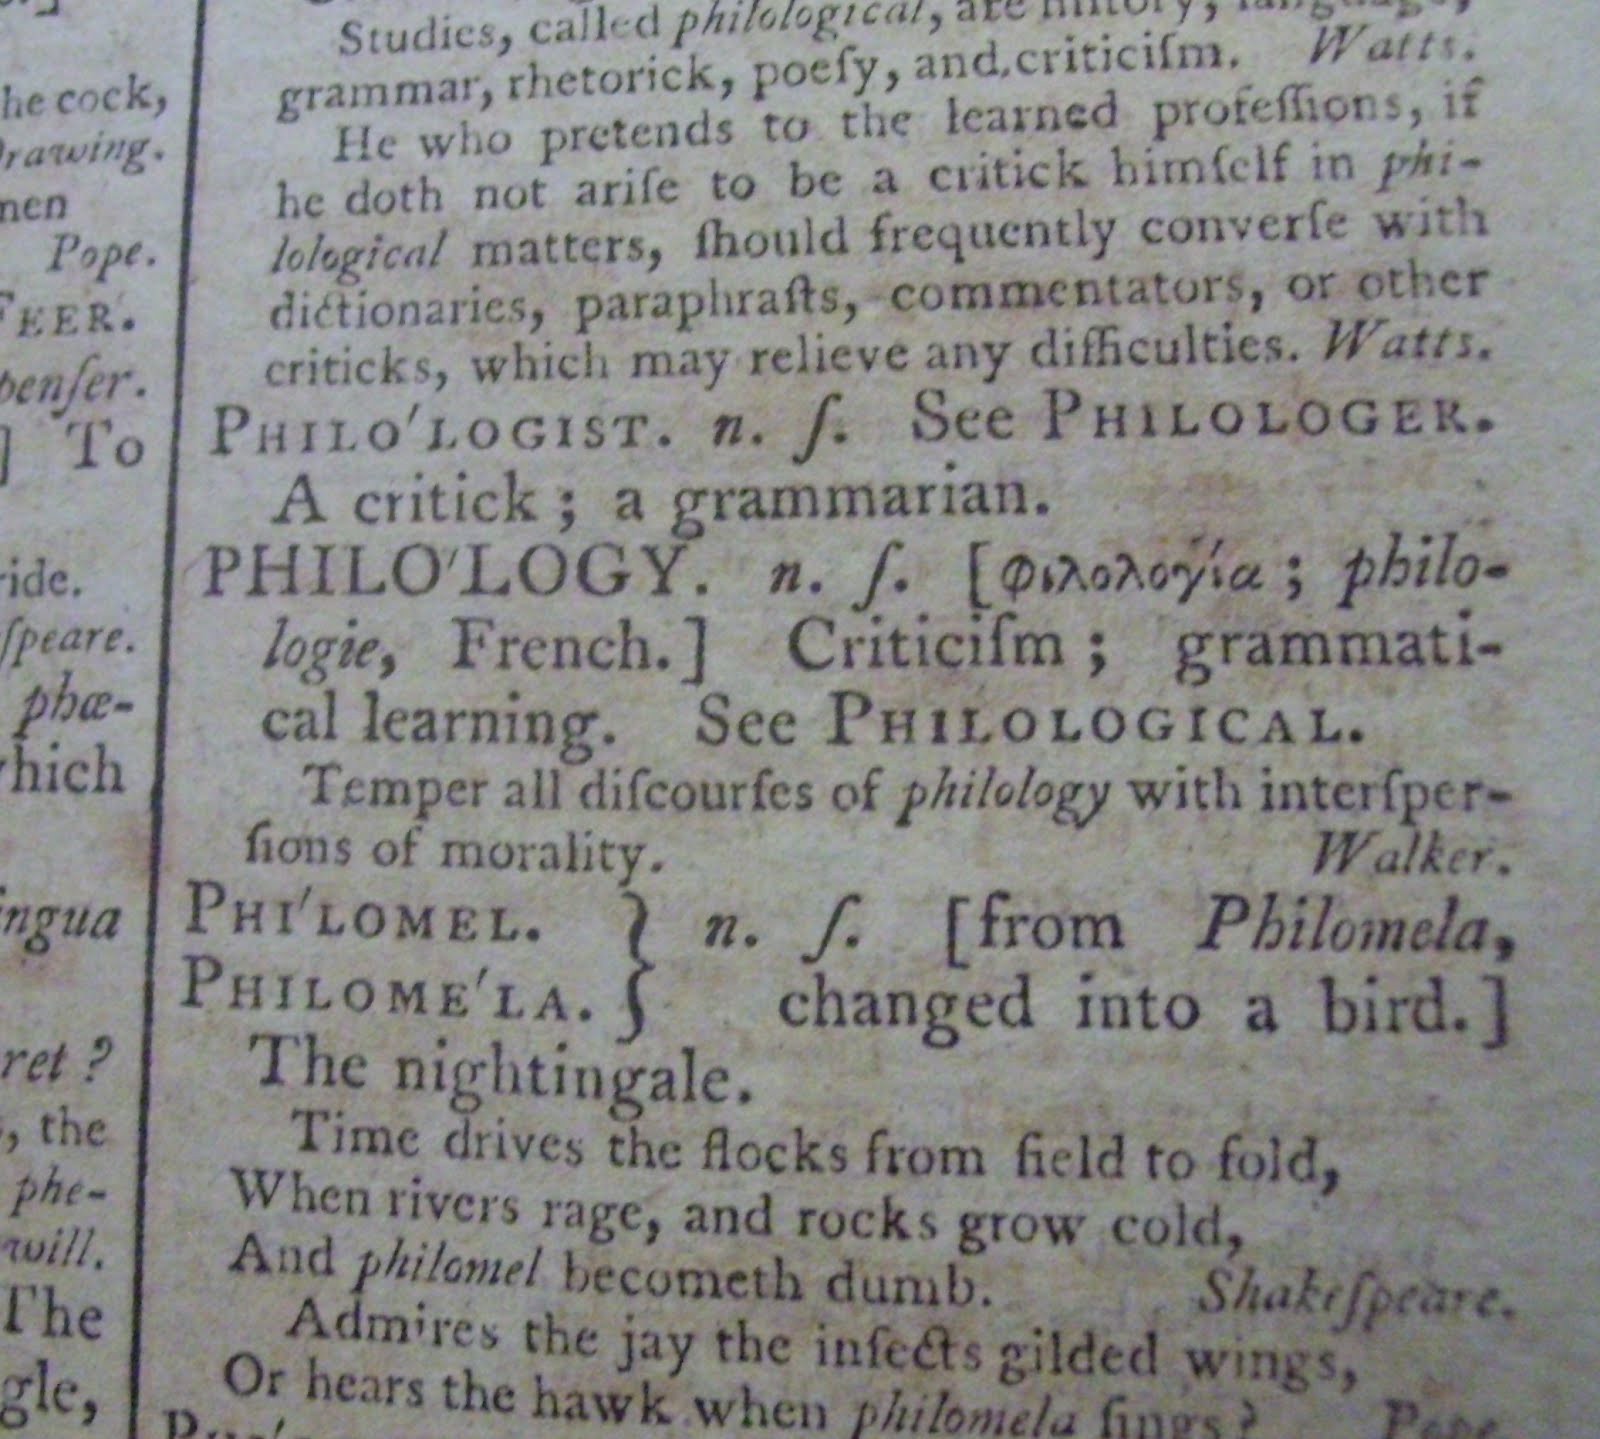 Excerpt from Samuel Johnson dictionary